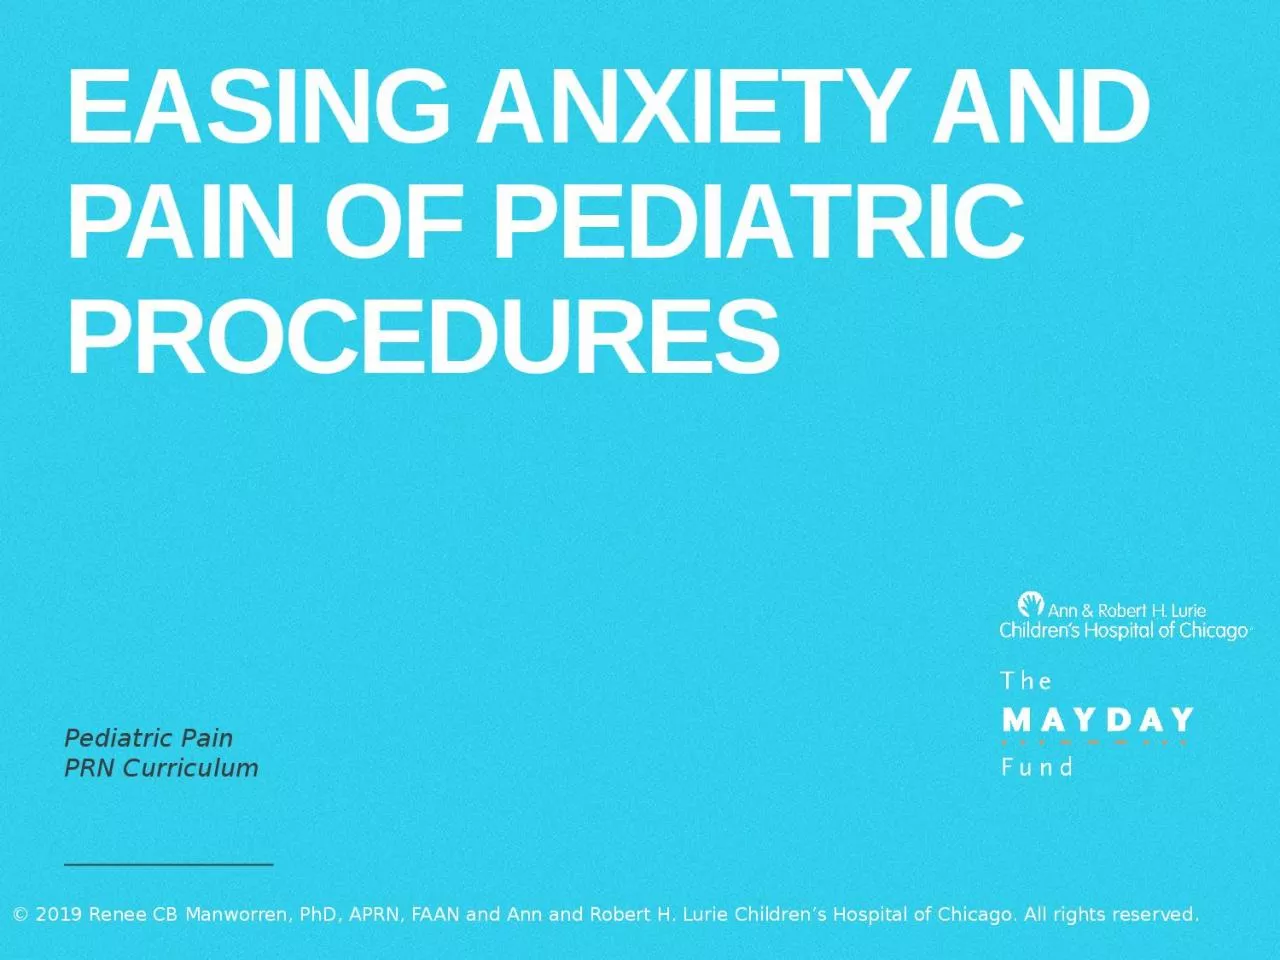 Easing Anxiety and Pain of Pediatric